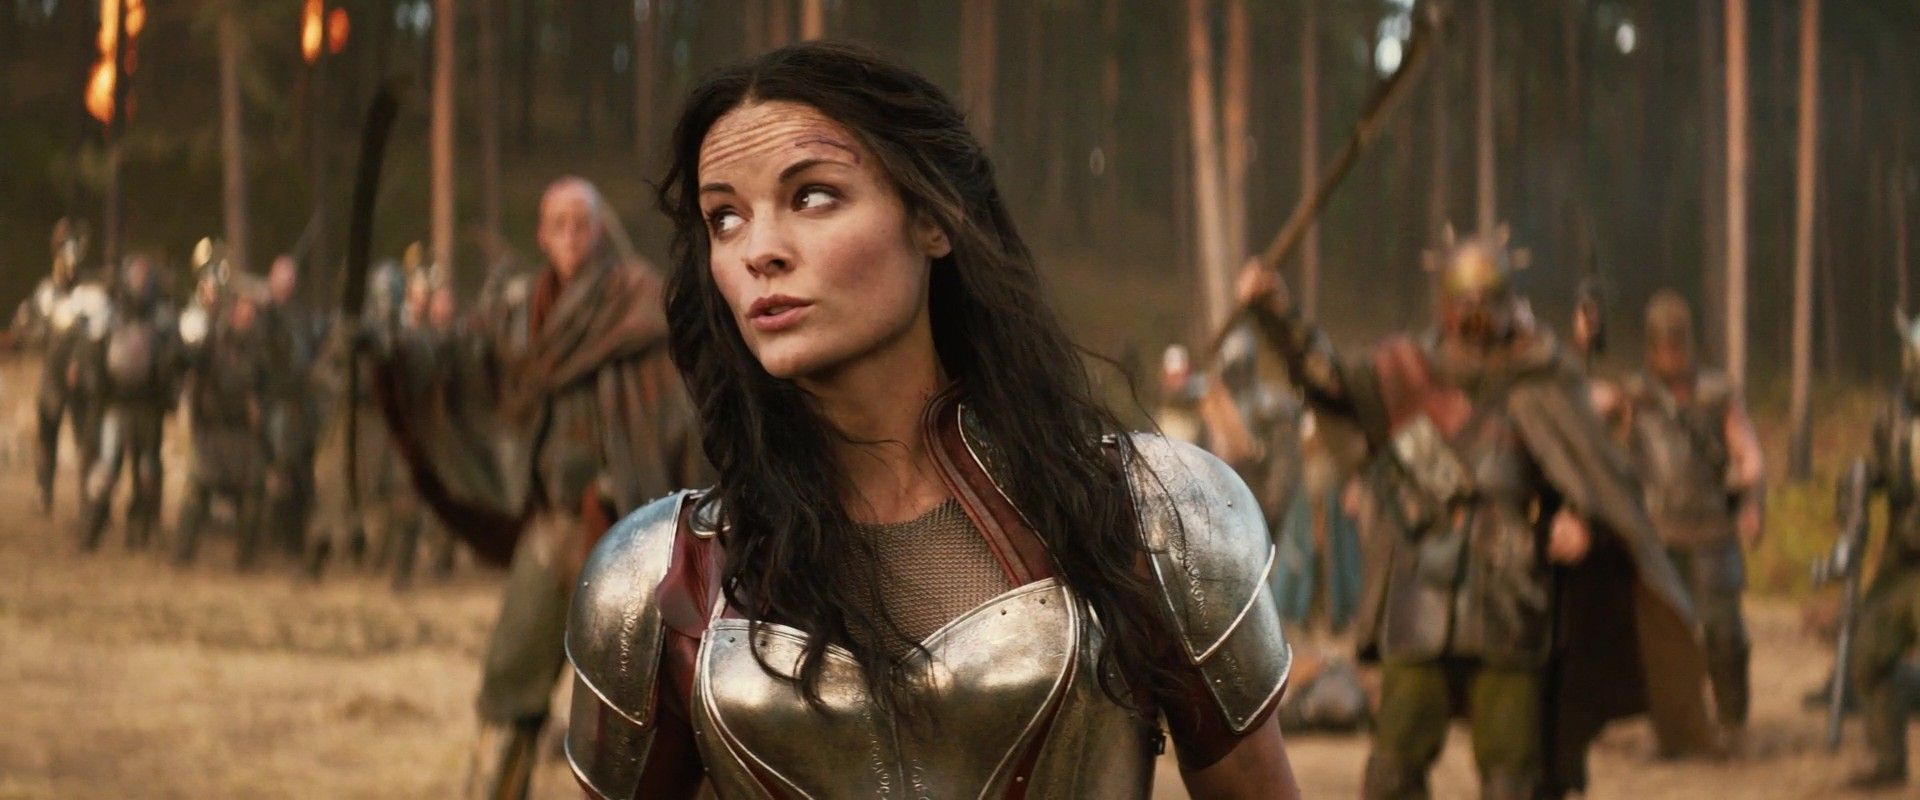 Lady Sif Returns For Another Agents of SHIELD Episode. The Mary Sue